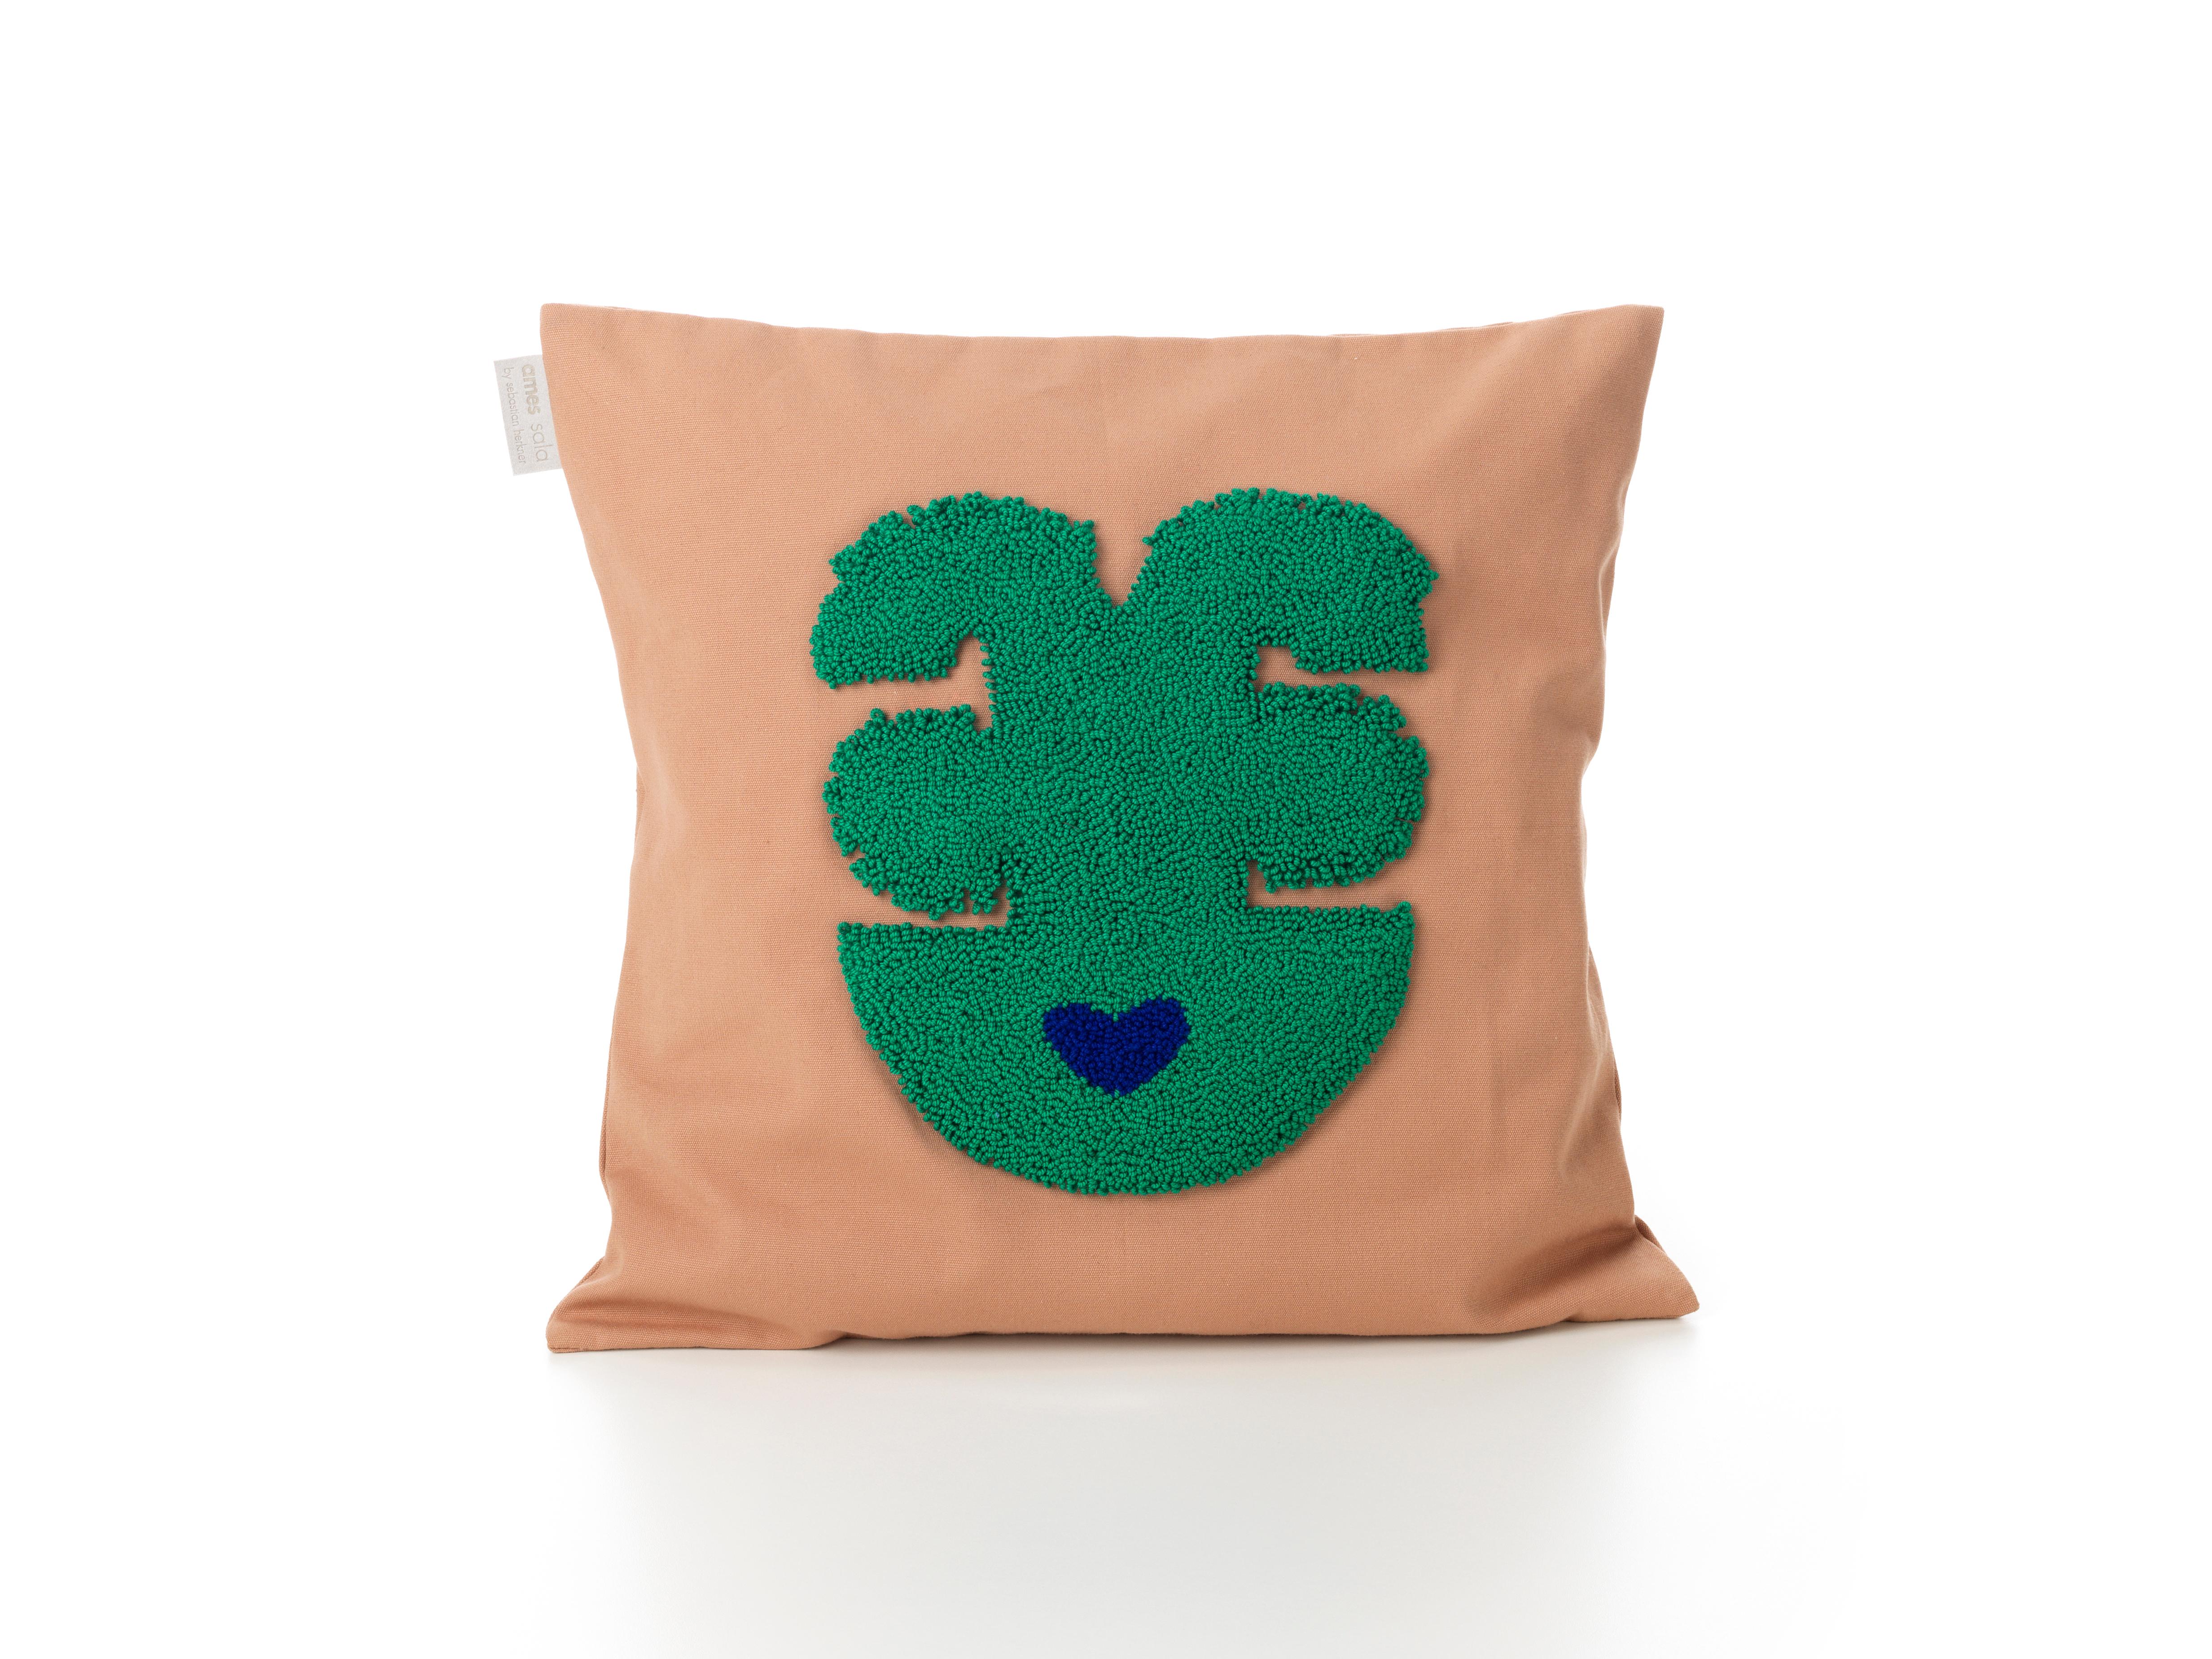 Quetzal Nido cushion by Sebastian Herkner
Materials: 100% cotton. 
Technique: Hand-woven in Colombia. 
Dimensions: W 38 x H 38 cm 
Available in colors: Nature, night blue, beige pink, terracotta. 

The Nido Qeztal cushion combines joyful colors with